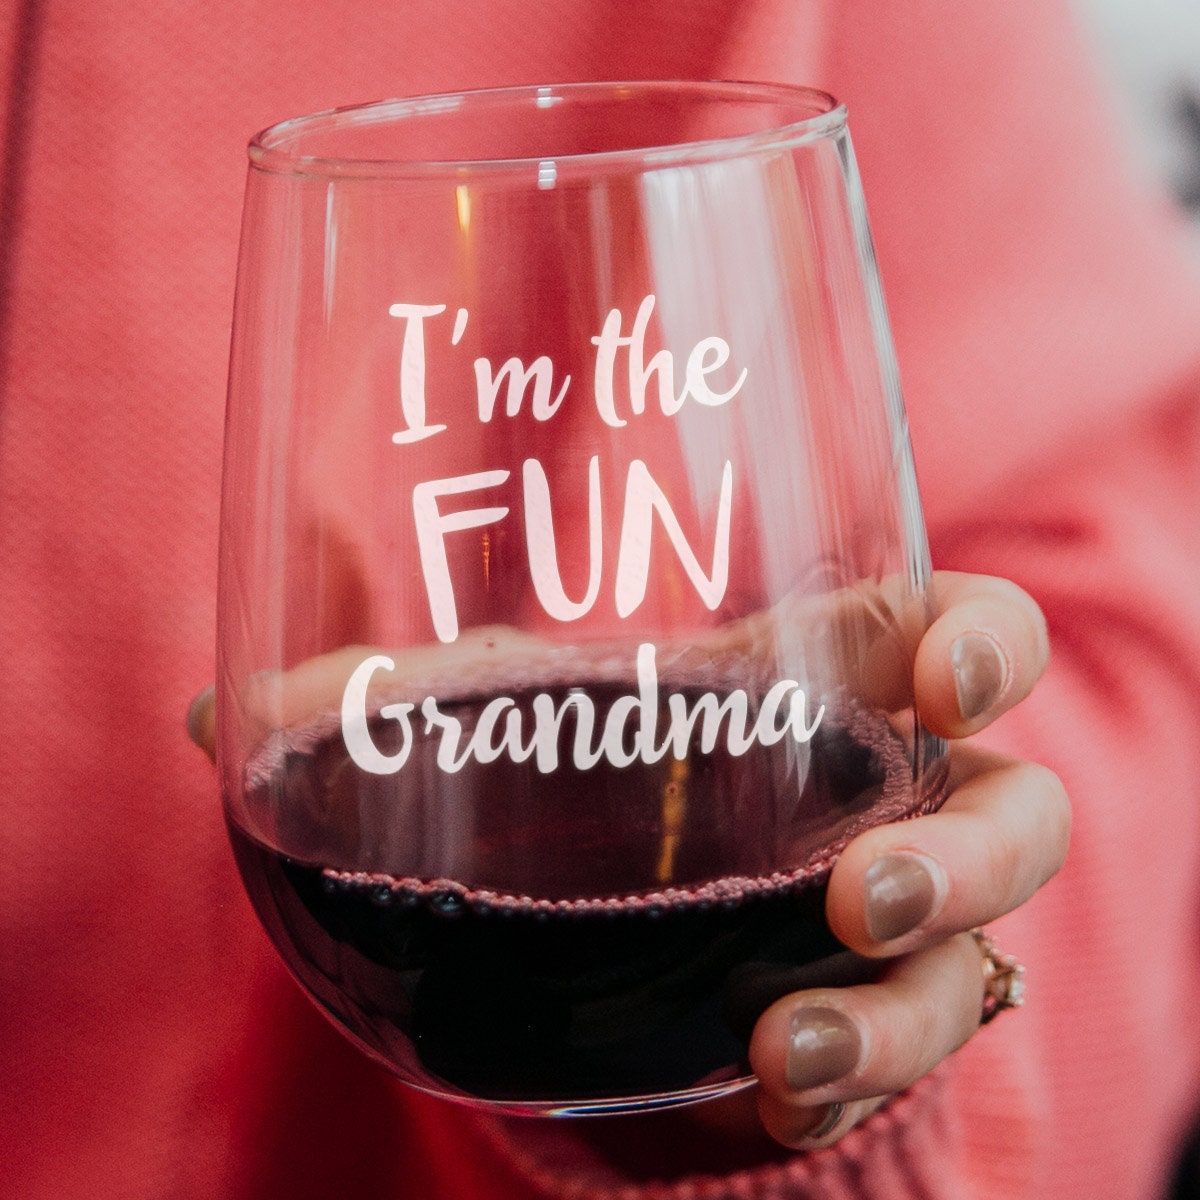 on The Rox Drinks Wine Gifts for Granny - 17 oz I’m The Crazy Grandma That Everyone Warned You About Engraved Stemless Wine Glass